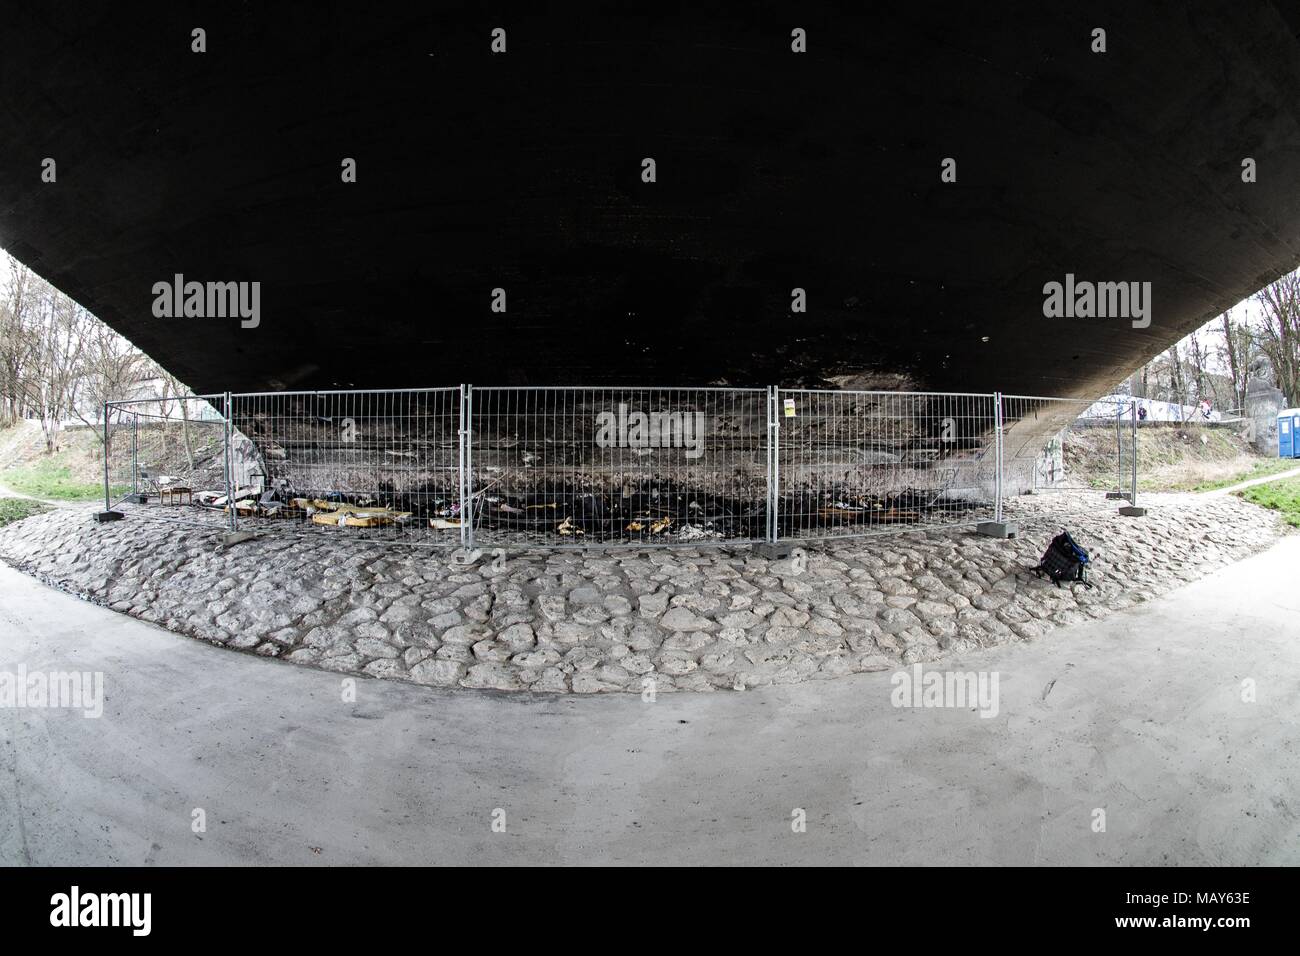 April 5, 2018 - MÃ¼Nchen, Bayern, Germany - A homeless camp under the ReichenbachbrÃ¼cke (Reichenbach Bridge) in Munich was the target of a suspected arson attack. The photos display the aftermath and the blackening of the surfaces of the bridge, as well as intense heat melting mattresses down to their springs. Damage to the bridge is estimated at 25,000 Euros. Four men, ages 24-53 were living there and unharmed. The suspects may have been two men who were standing near the fire and throwing objects into it. Credit: Sachelle Babbar/ZUMA Wire/Alamy Live News Stock Photo